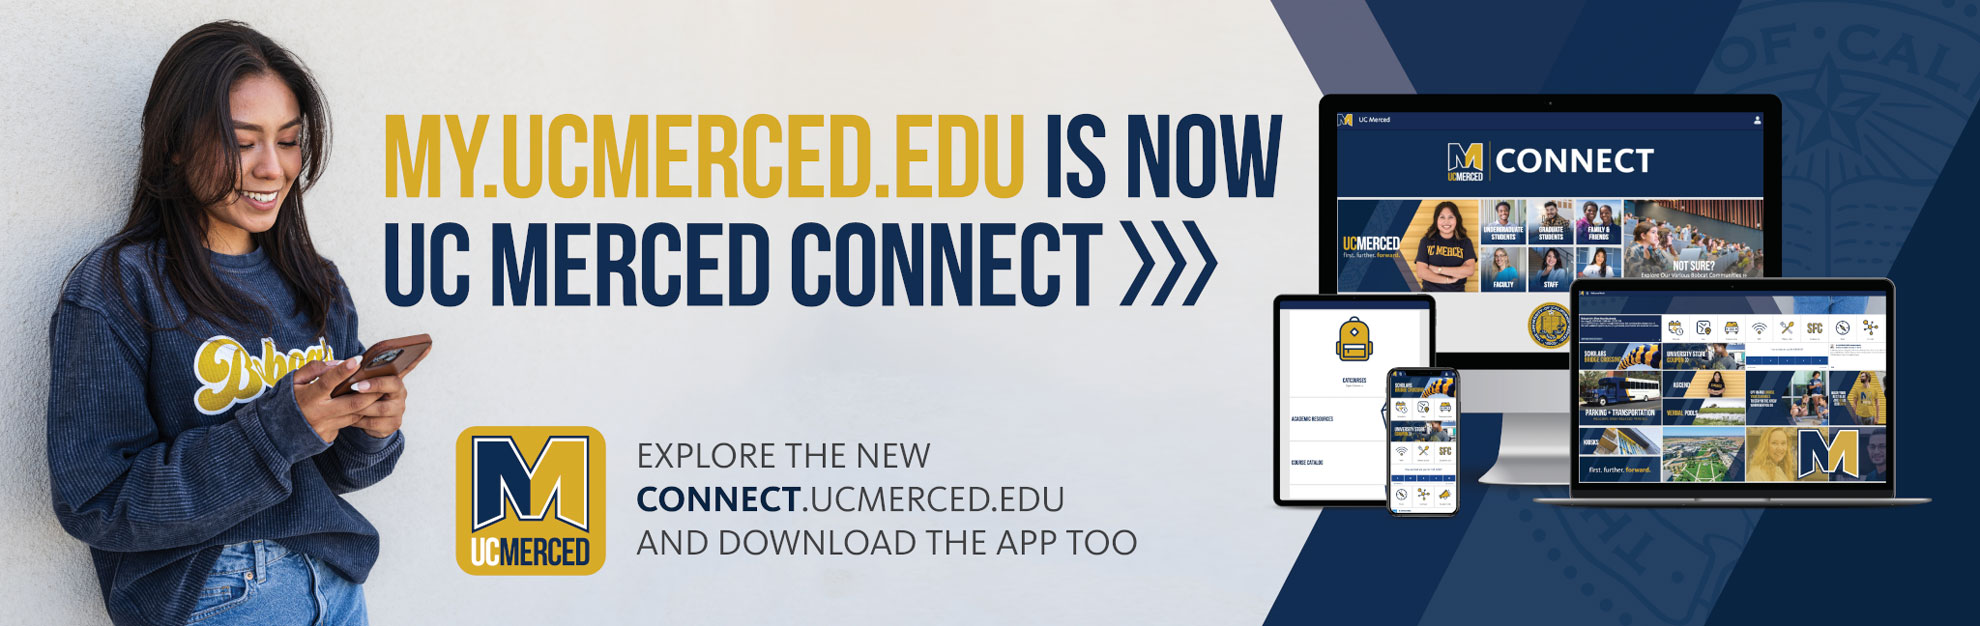 Connect header image